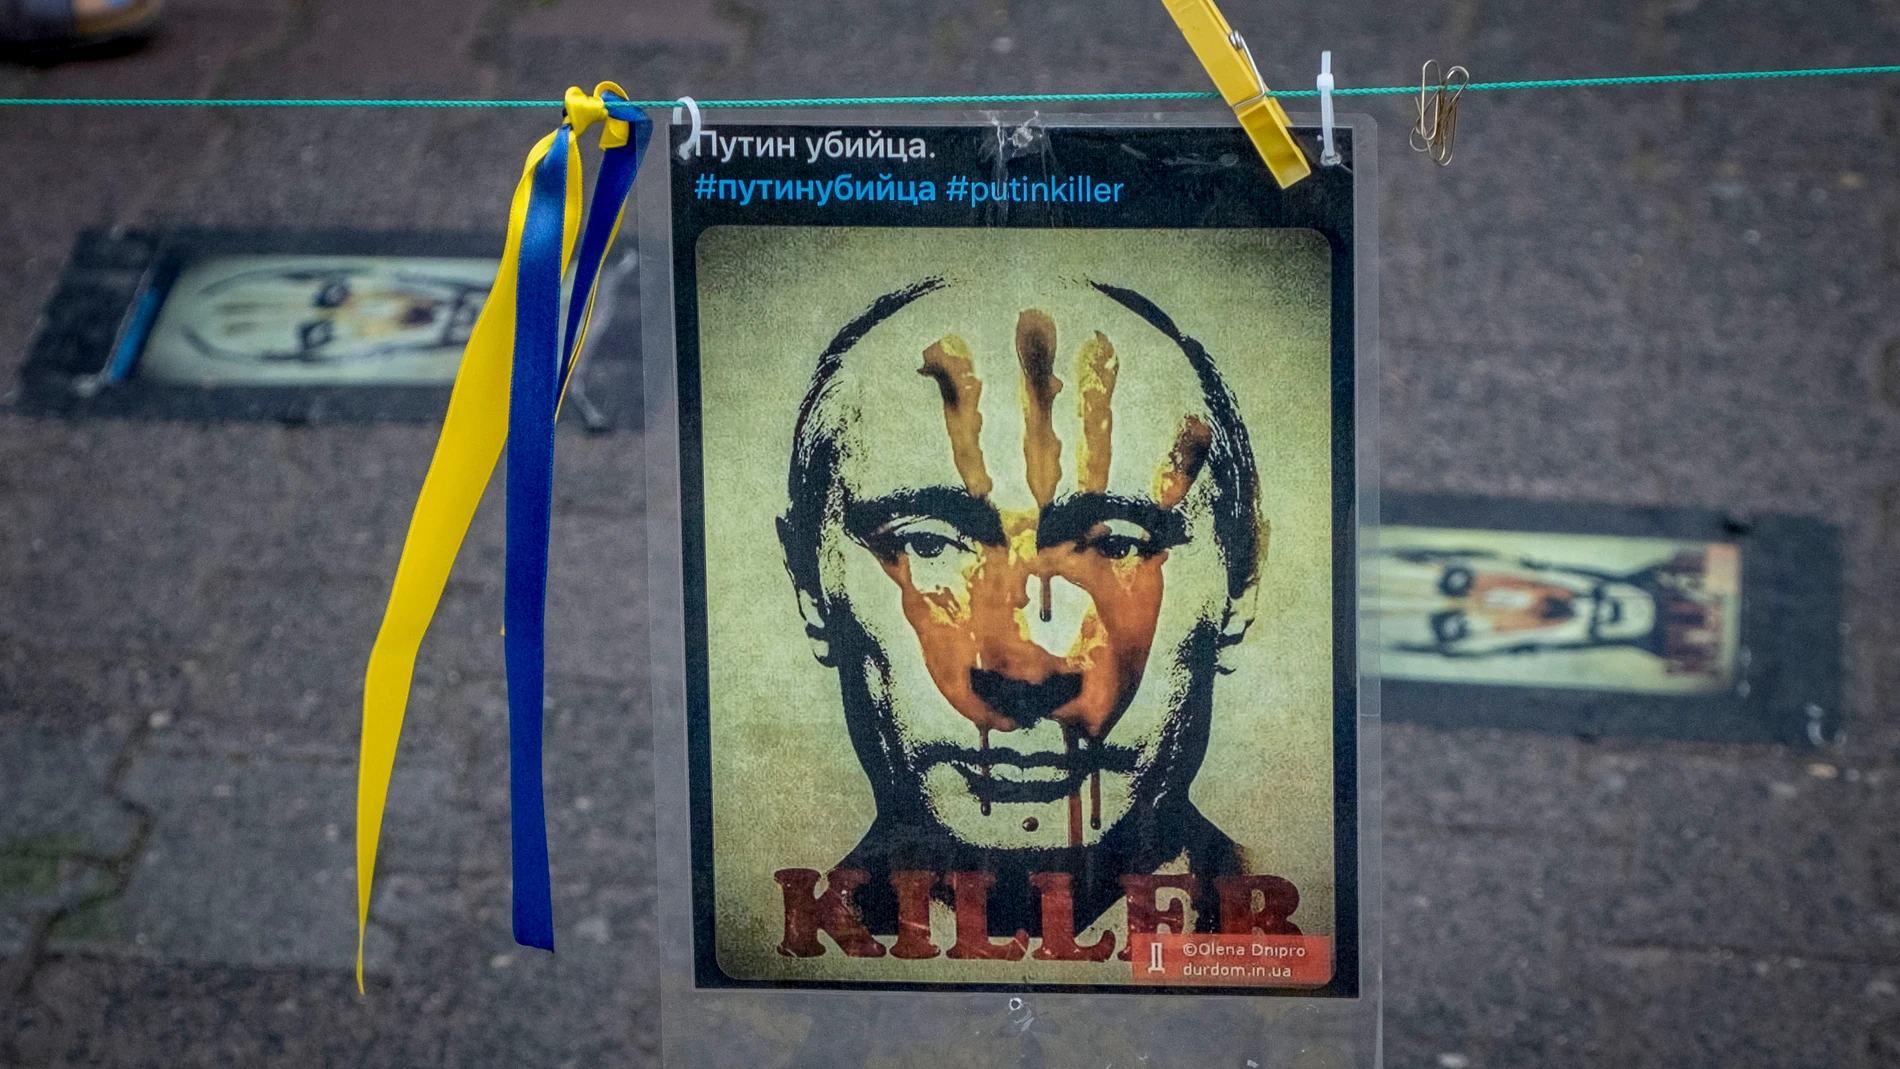 A poster showing Russian President Putin is displayed as part of a vigil near the Russian consulate in Frankfurt, Germany, Saturday, June 24, 2023. (AP Photo/Michael Probst)